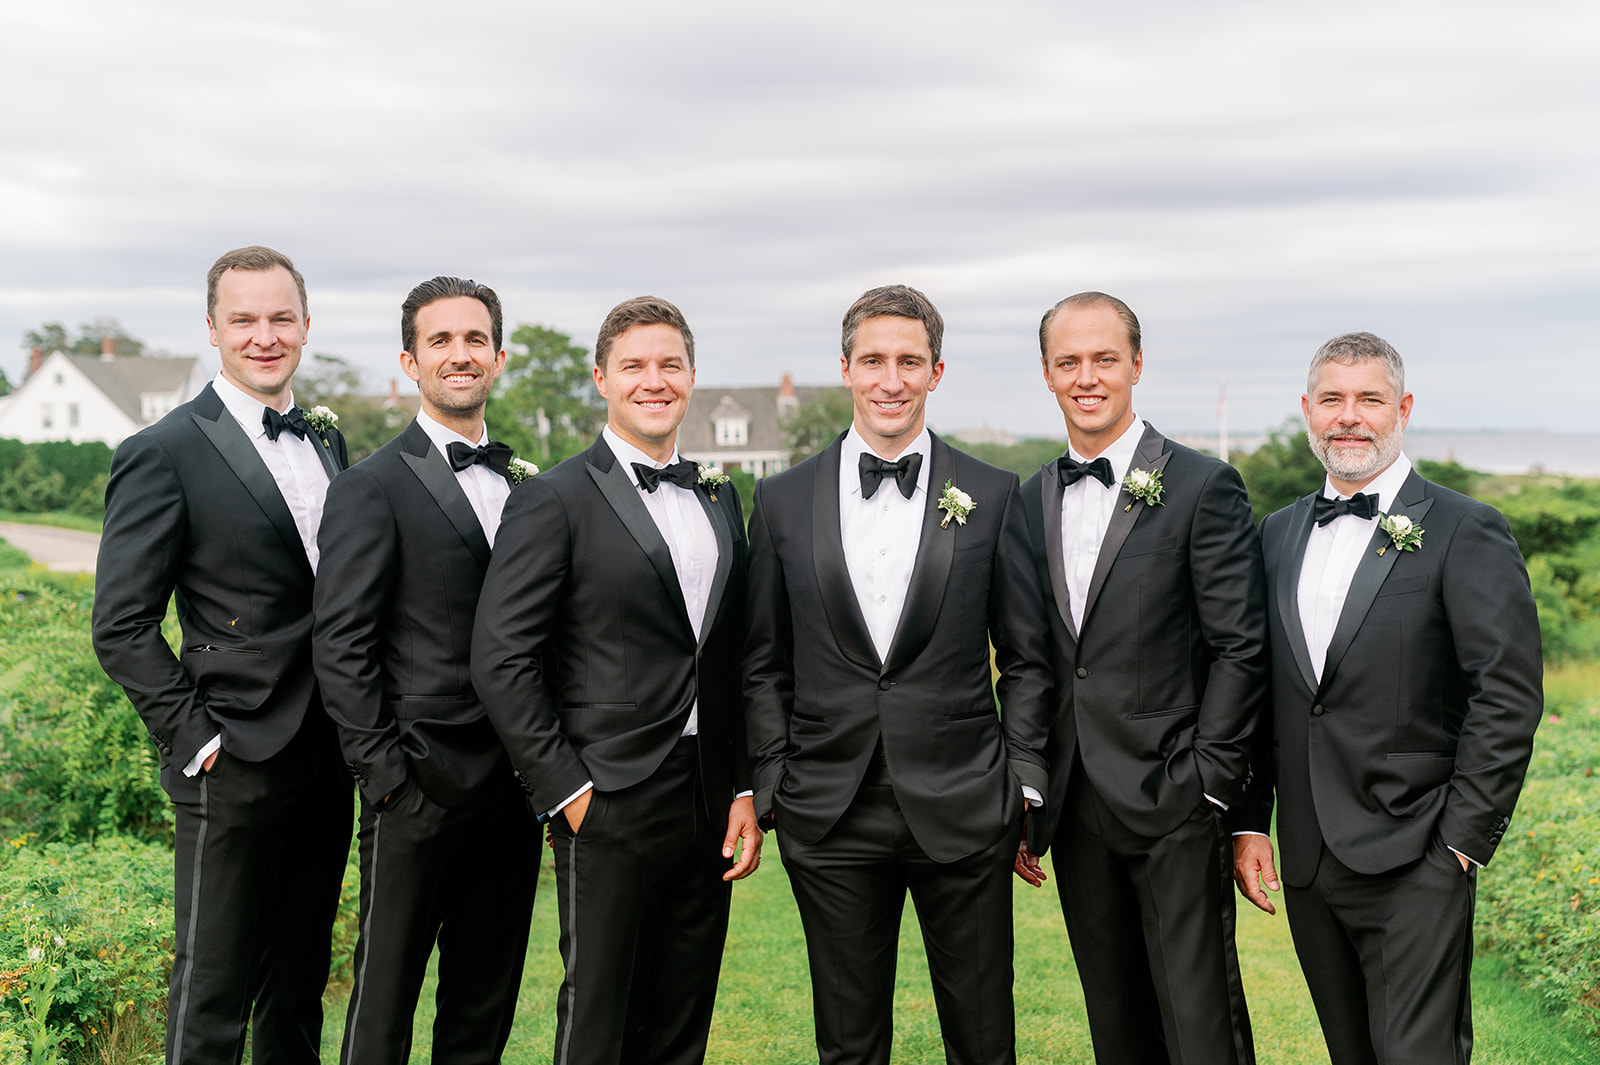 Posed groomsmen portrait with classic black suits and bowties. 